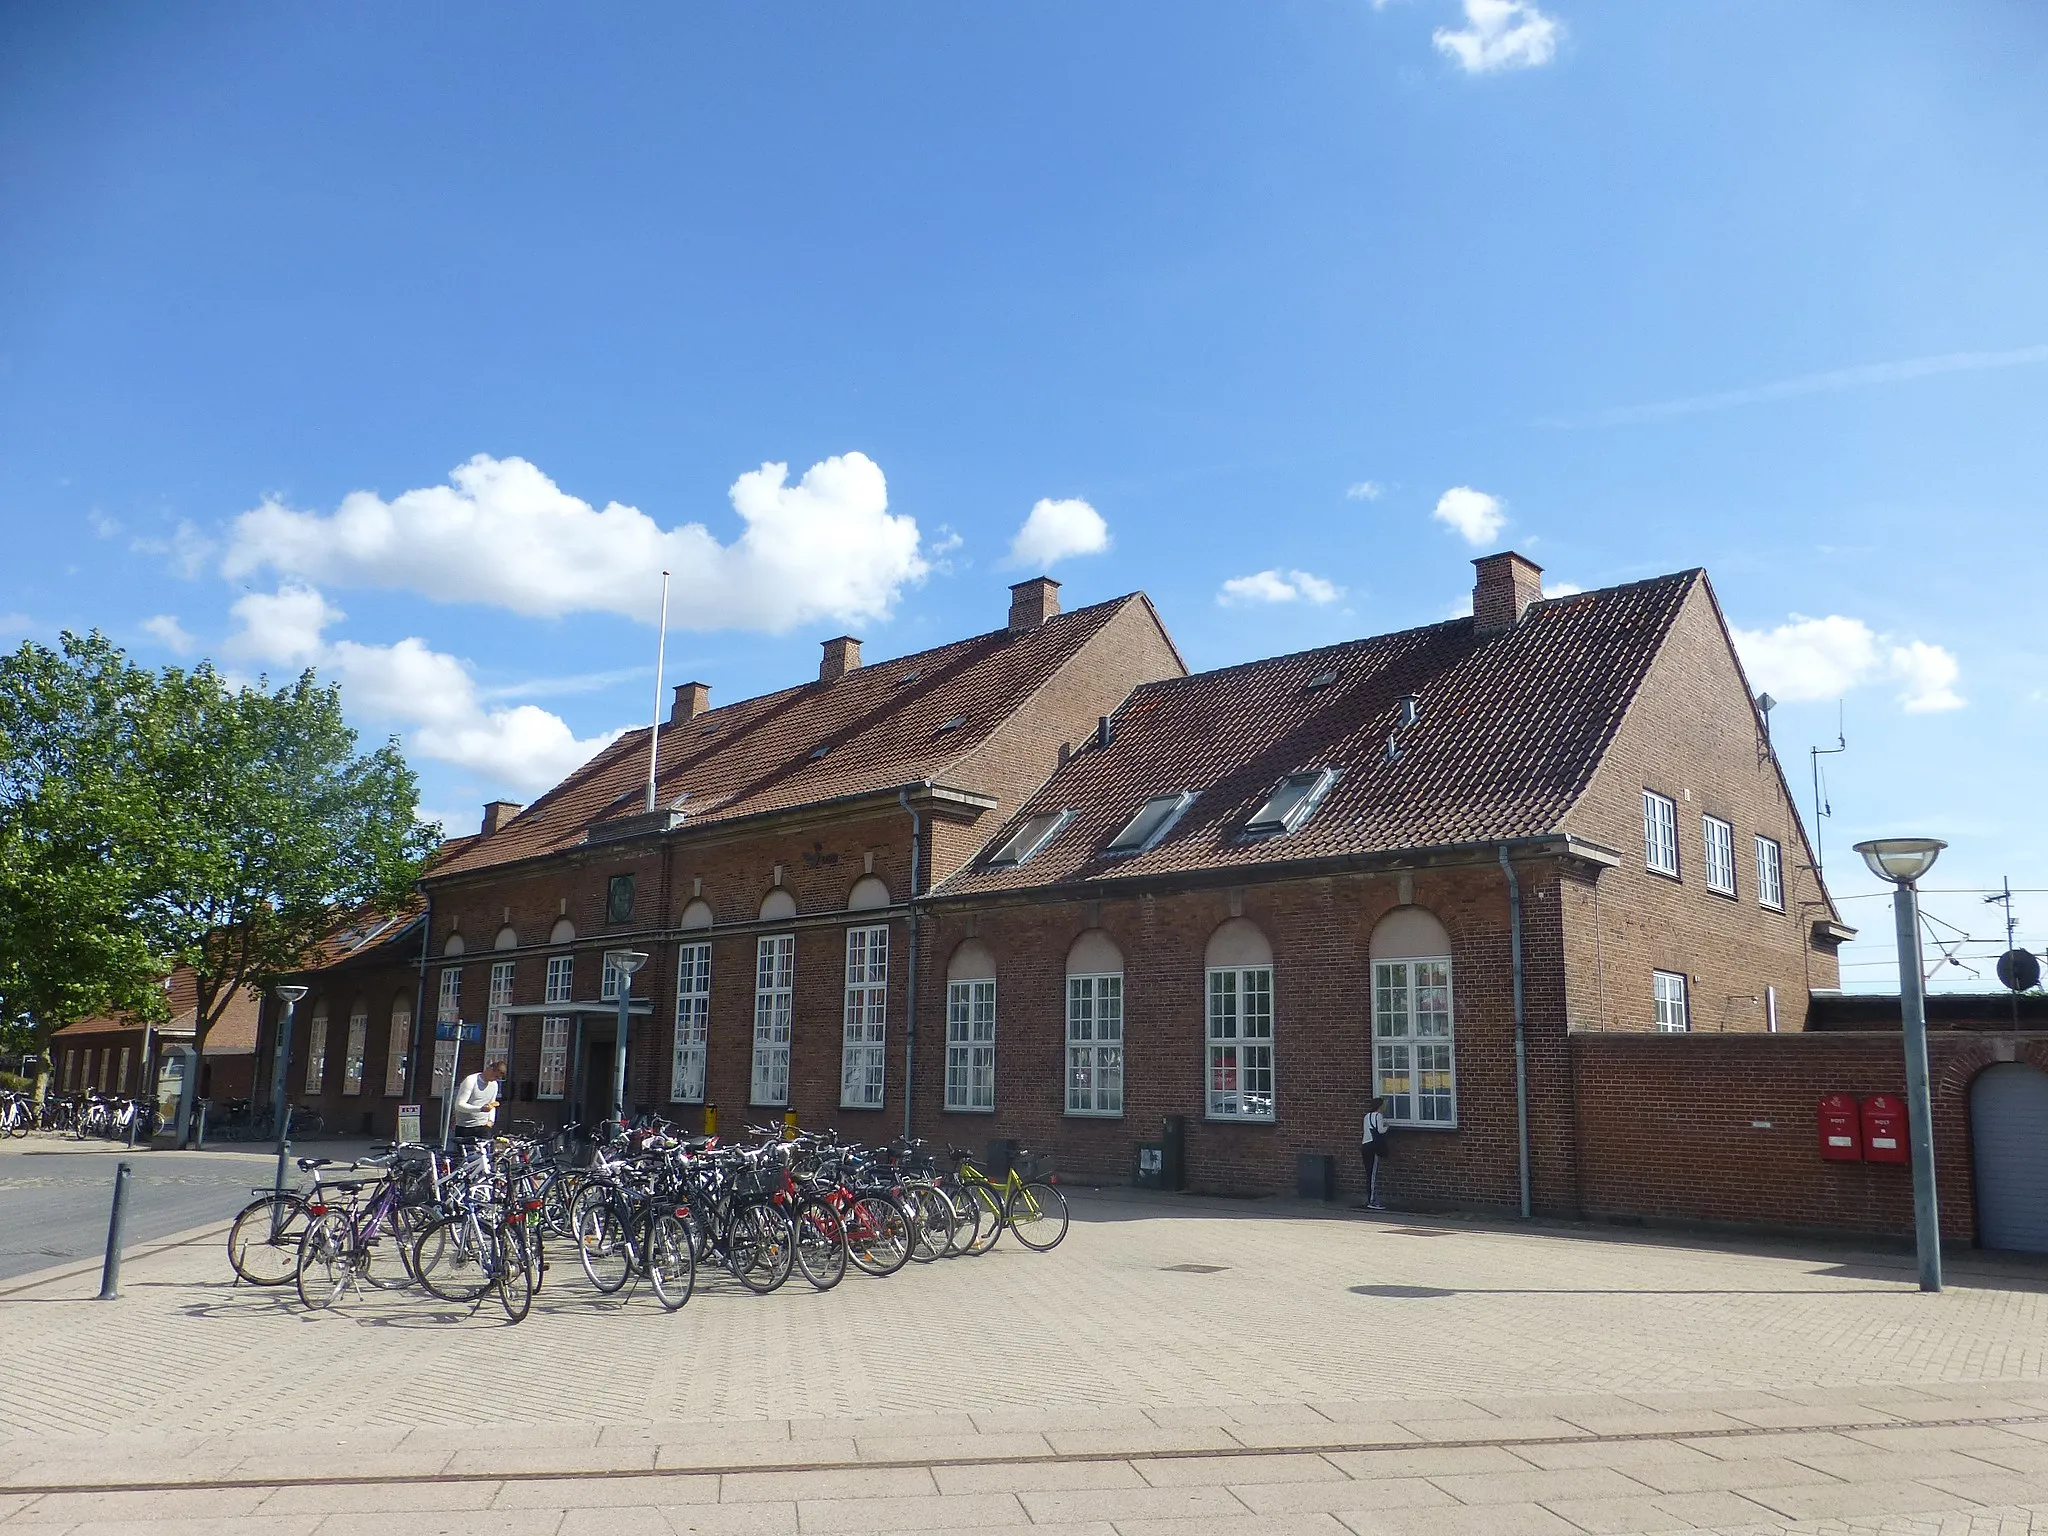 Photo showing: Ringsted Station on Vestbanen and Sydbanen in Denmark.